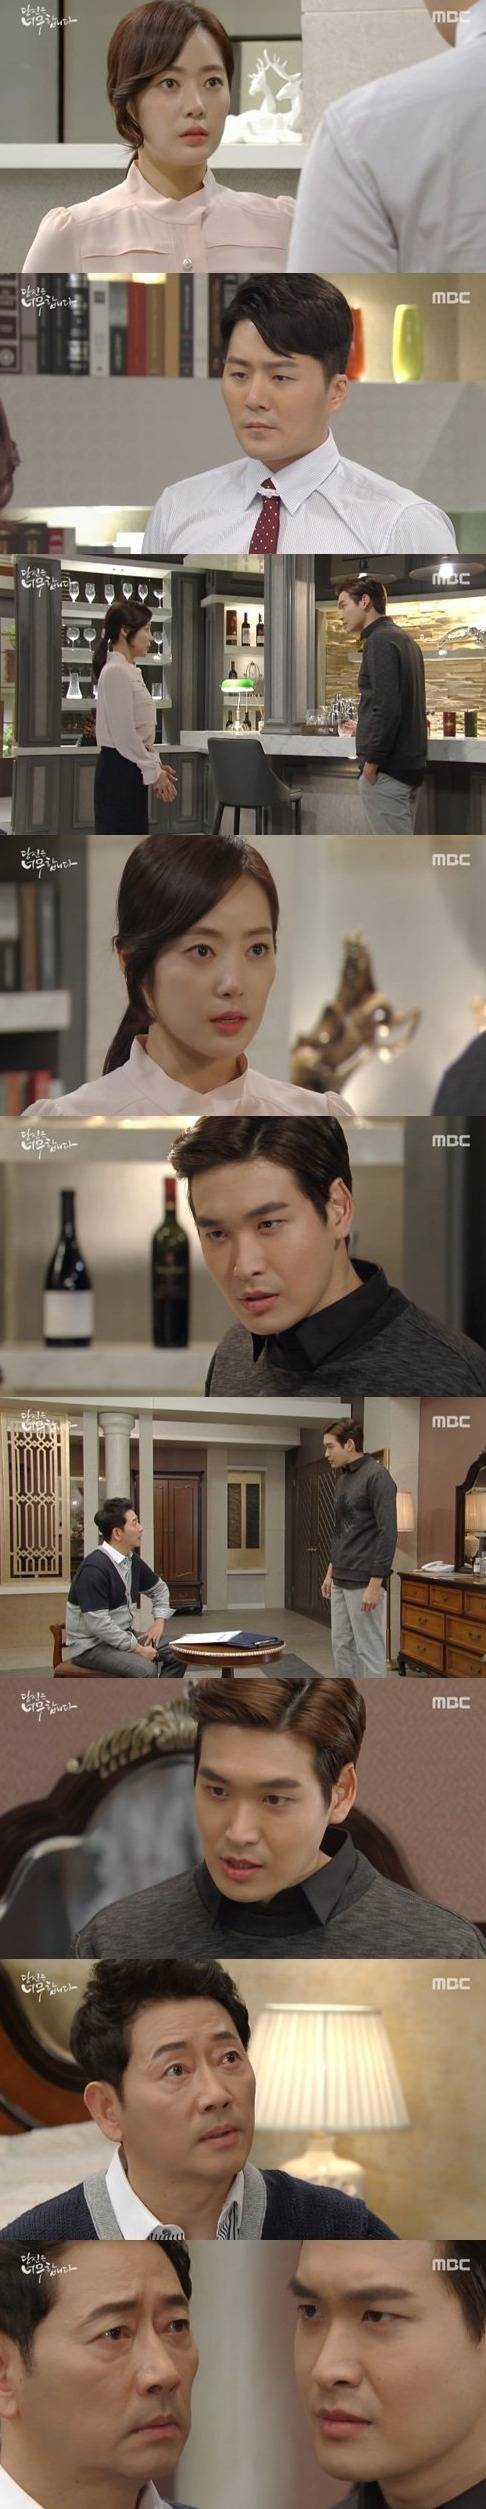 Spoiler Added Episodes 9 And 10 Captures For The Korean Drama Youre Too Much Hancinema